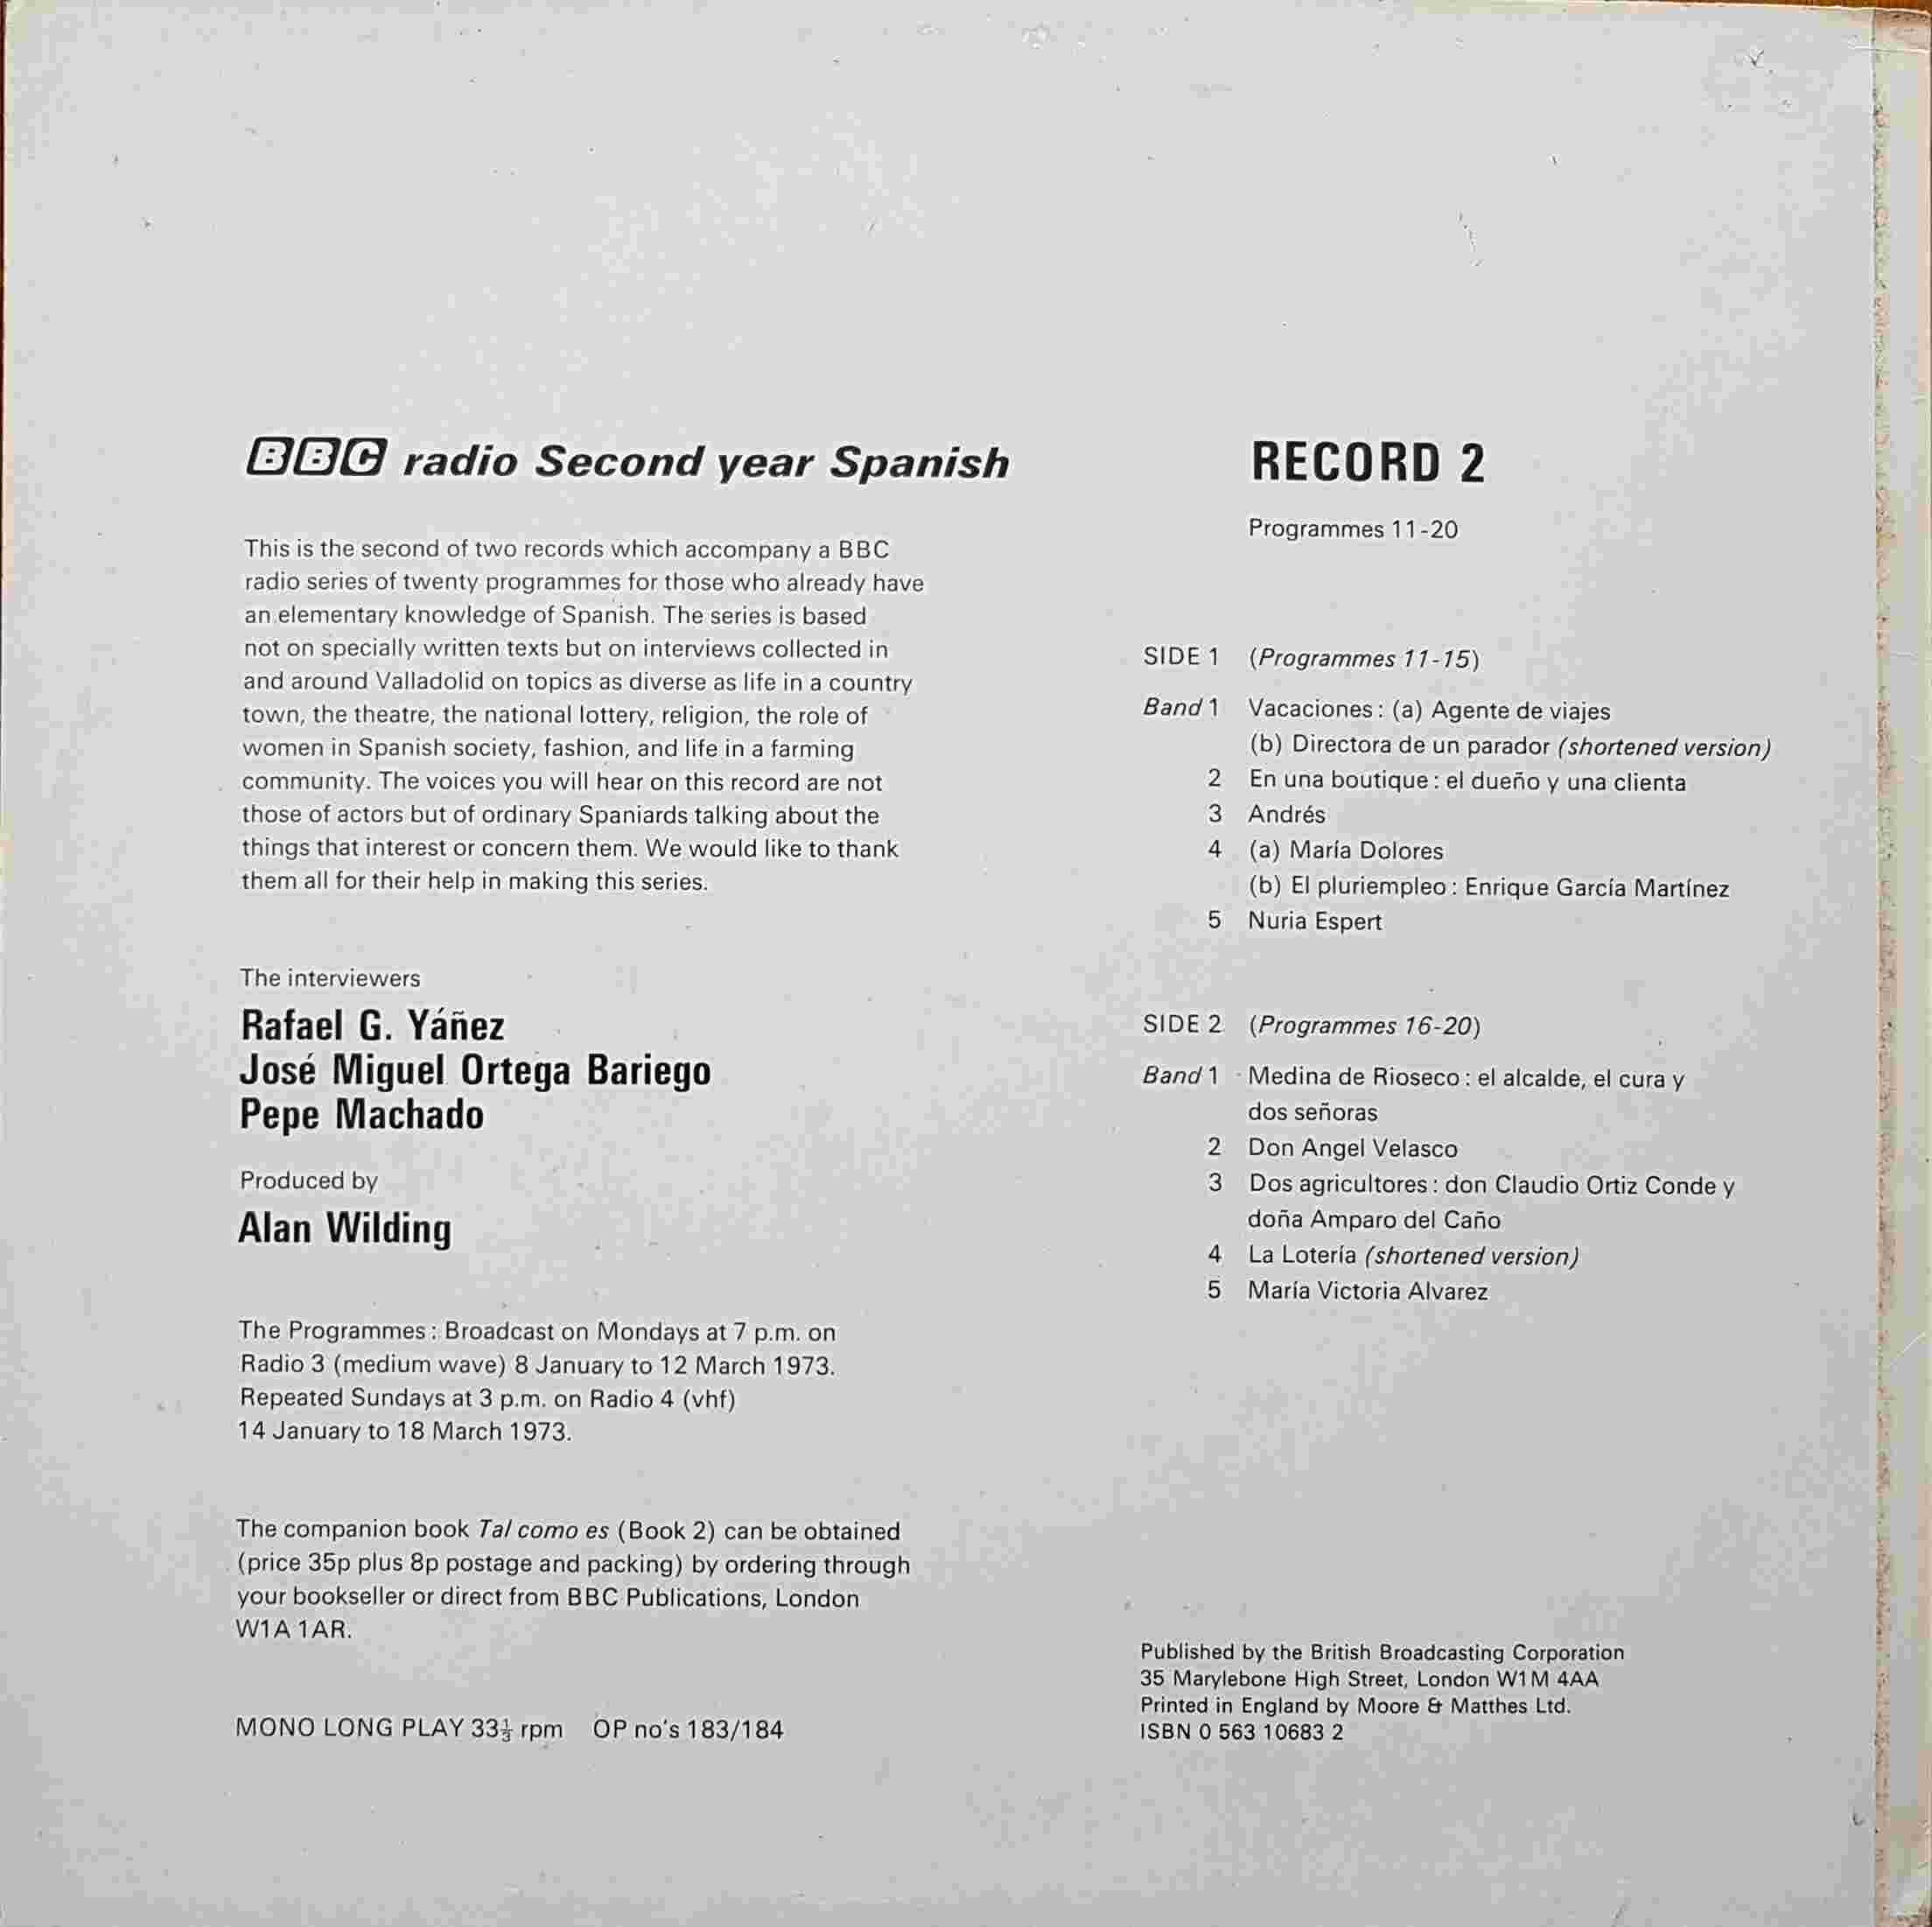 Picture of OP 183/184 Tal como es - BBC radio Second year Spanish - Record 2 - Programmes 11 - 20 by artist Carmen Ruiz / Pepe Machado from the BBC records and Tapes library